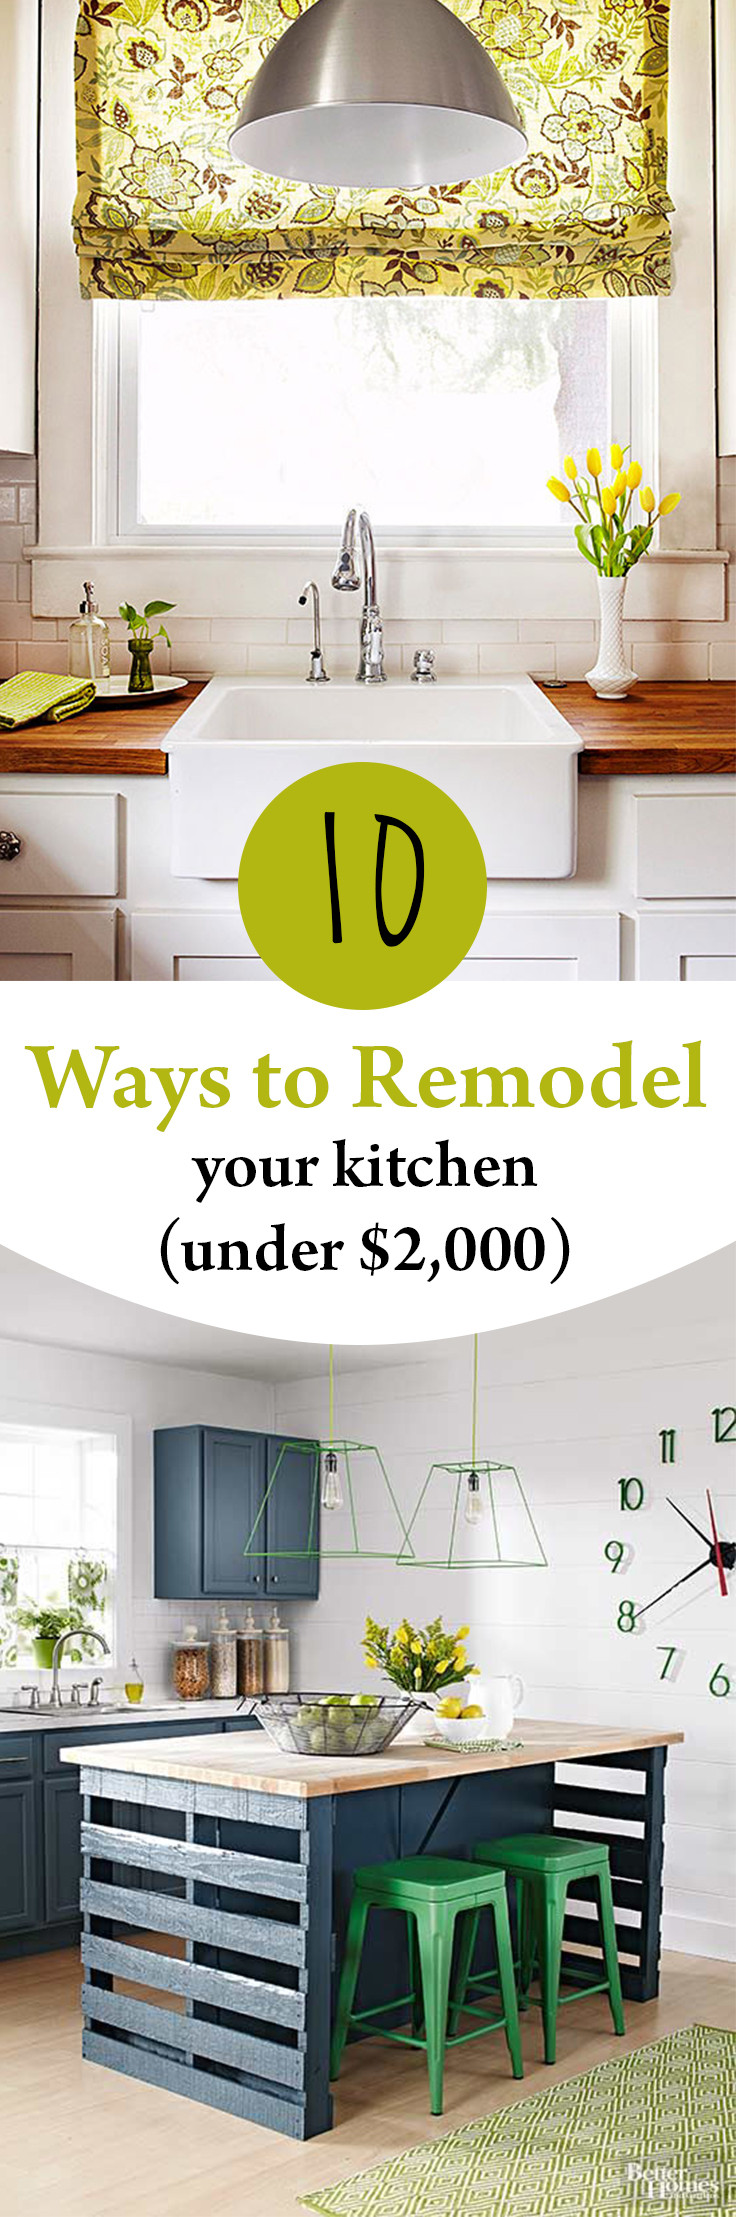 Cheapest Way To Remodel Kitchen
 10 Ways to Remodel Your Kitchen Under $2 000 Wrapped